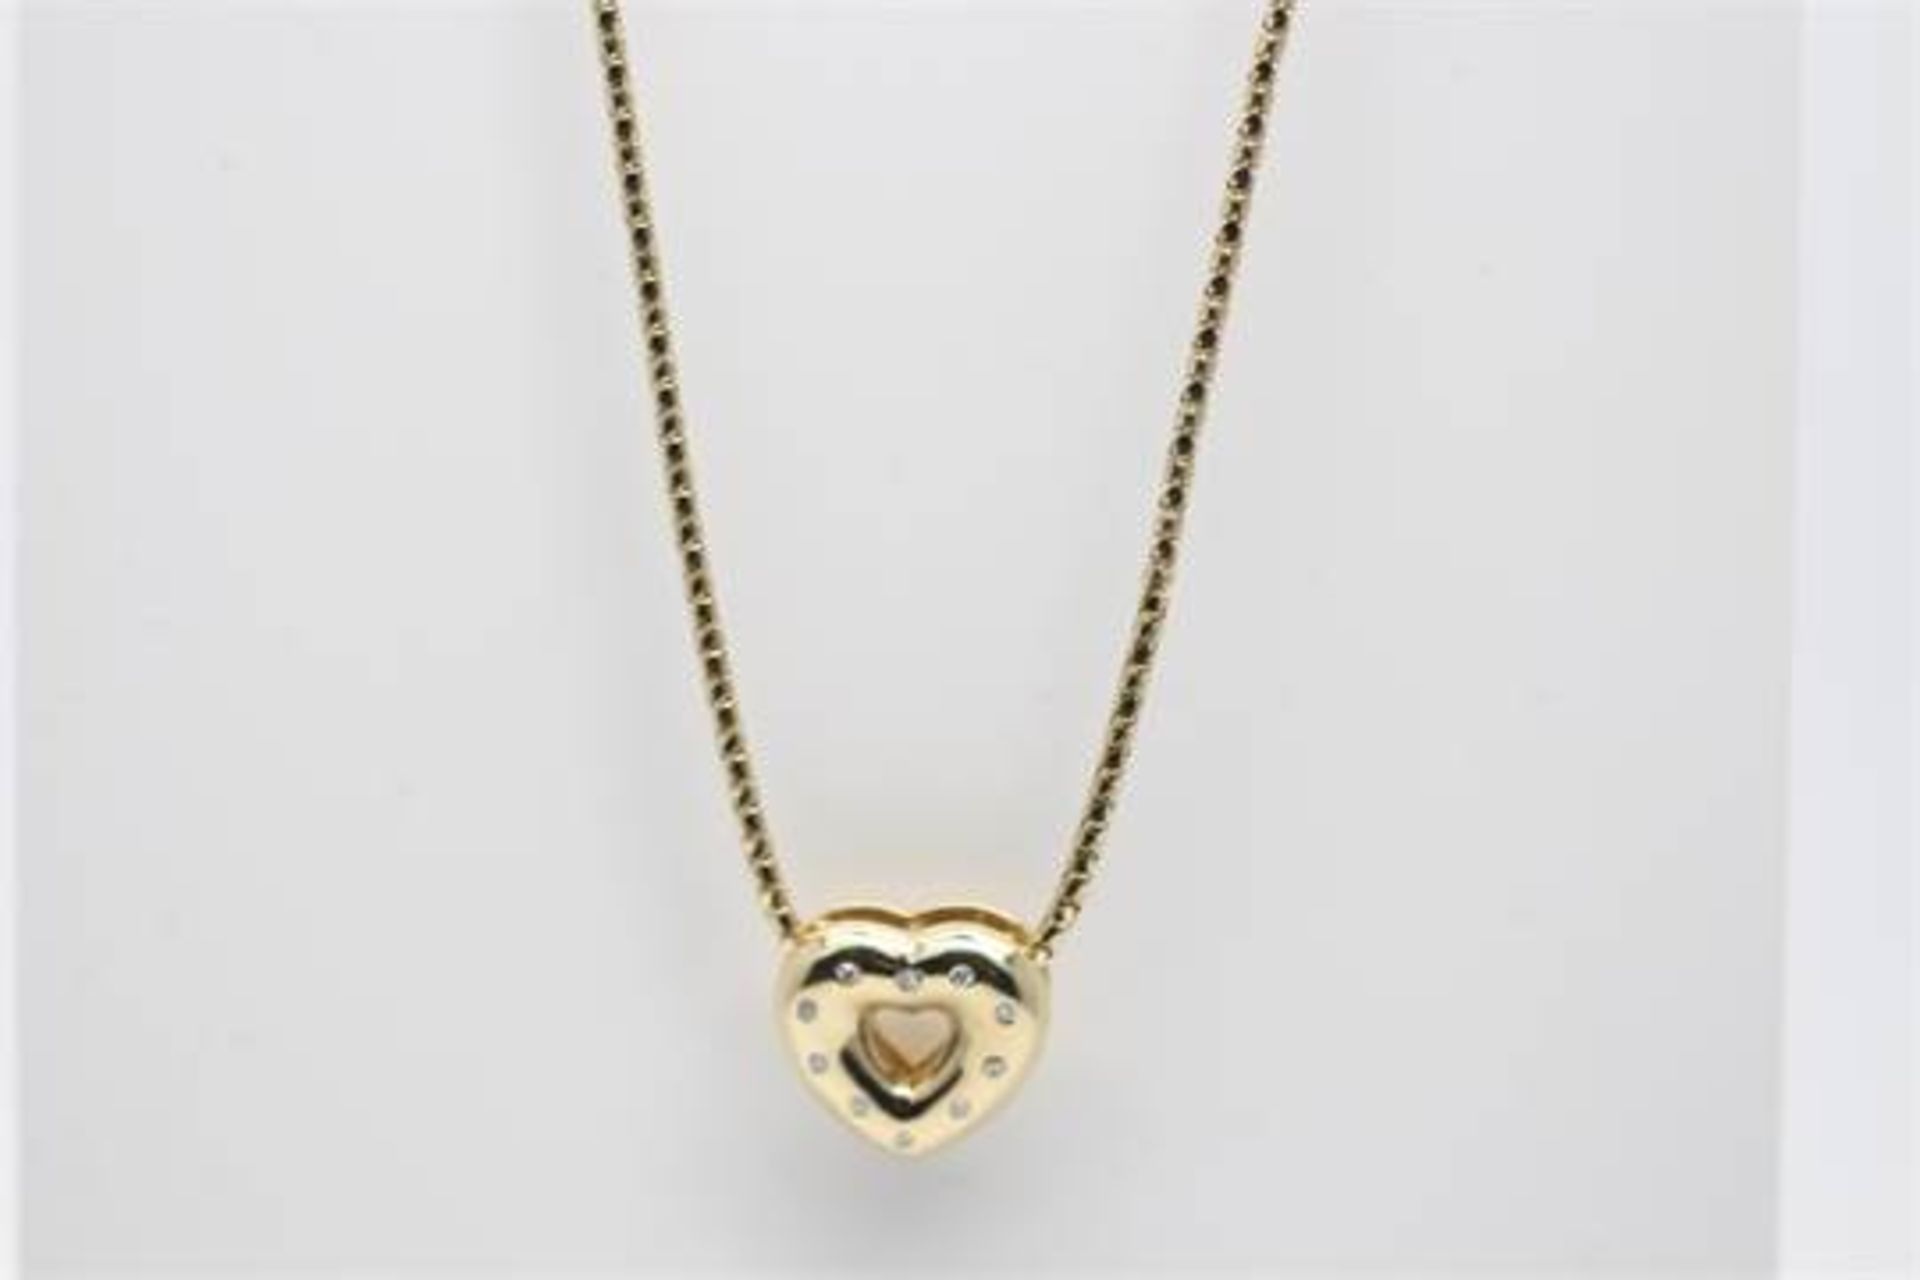 SOLID YELLOW GOLD LADIES NECKLACE AND HEART SHAPED PENDENT, PENDENT SET WITH 10 SINGLE BRILLIANT CUT